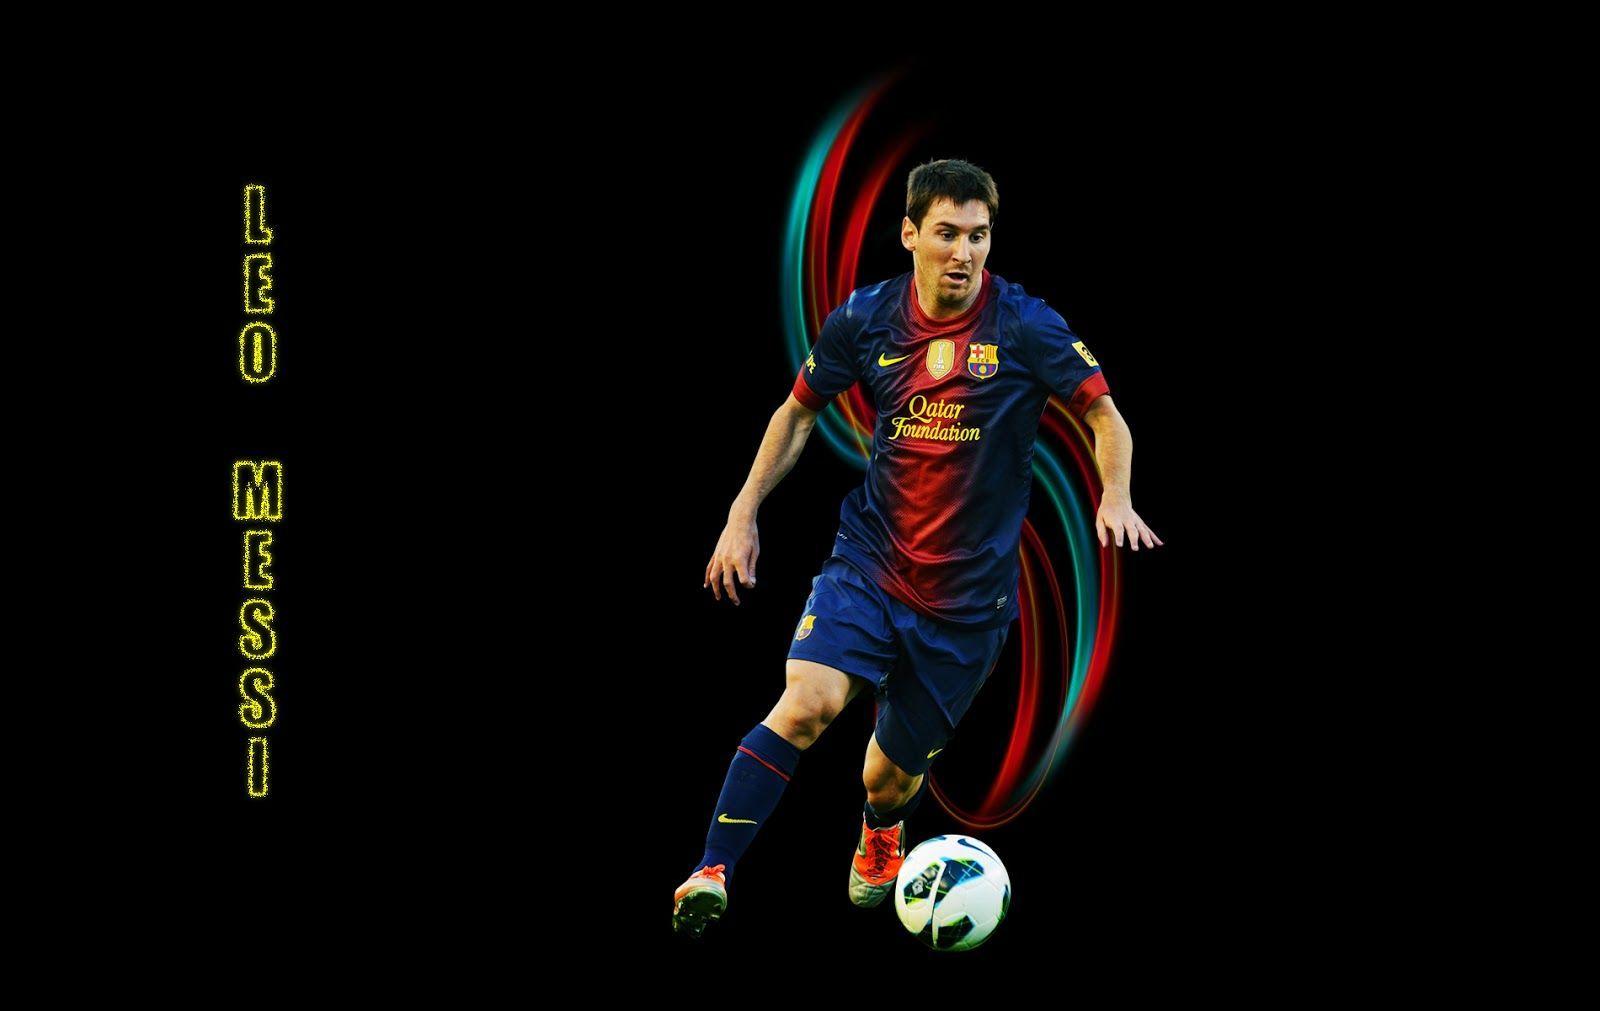 Lionel Messi 2013 Wallpapers HD 1080p